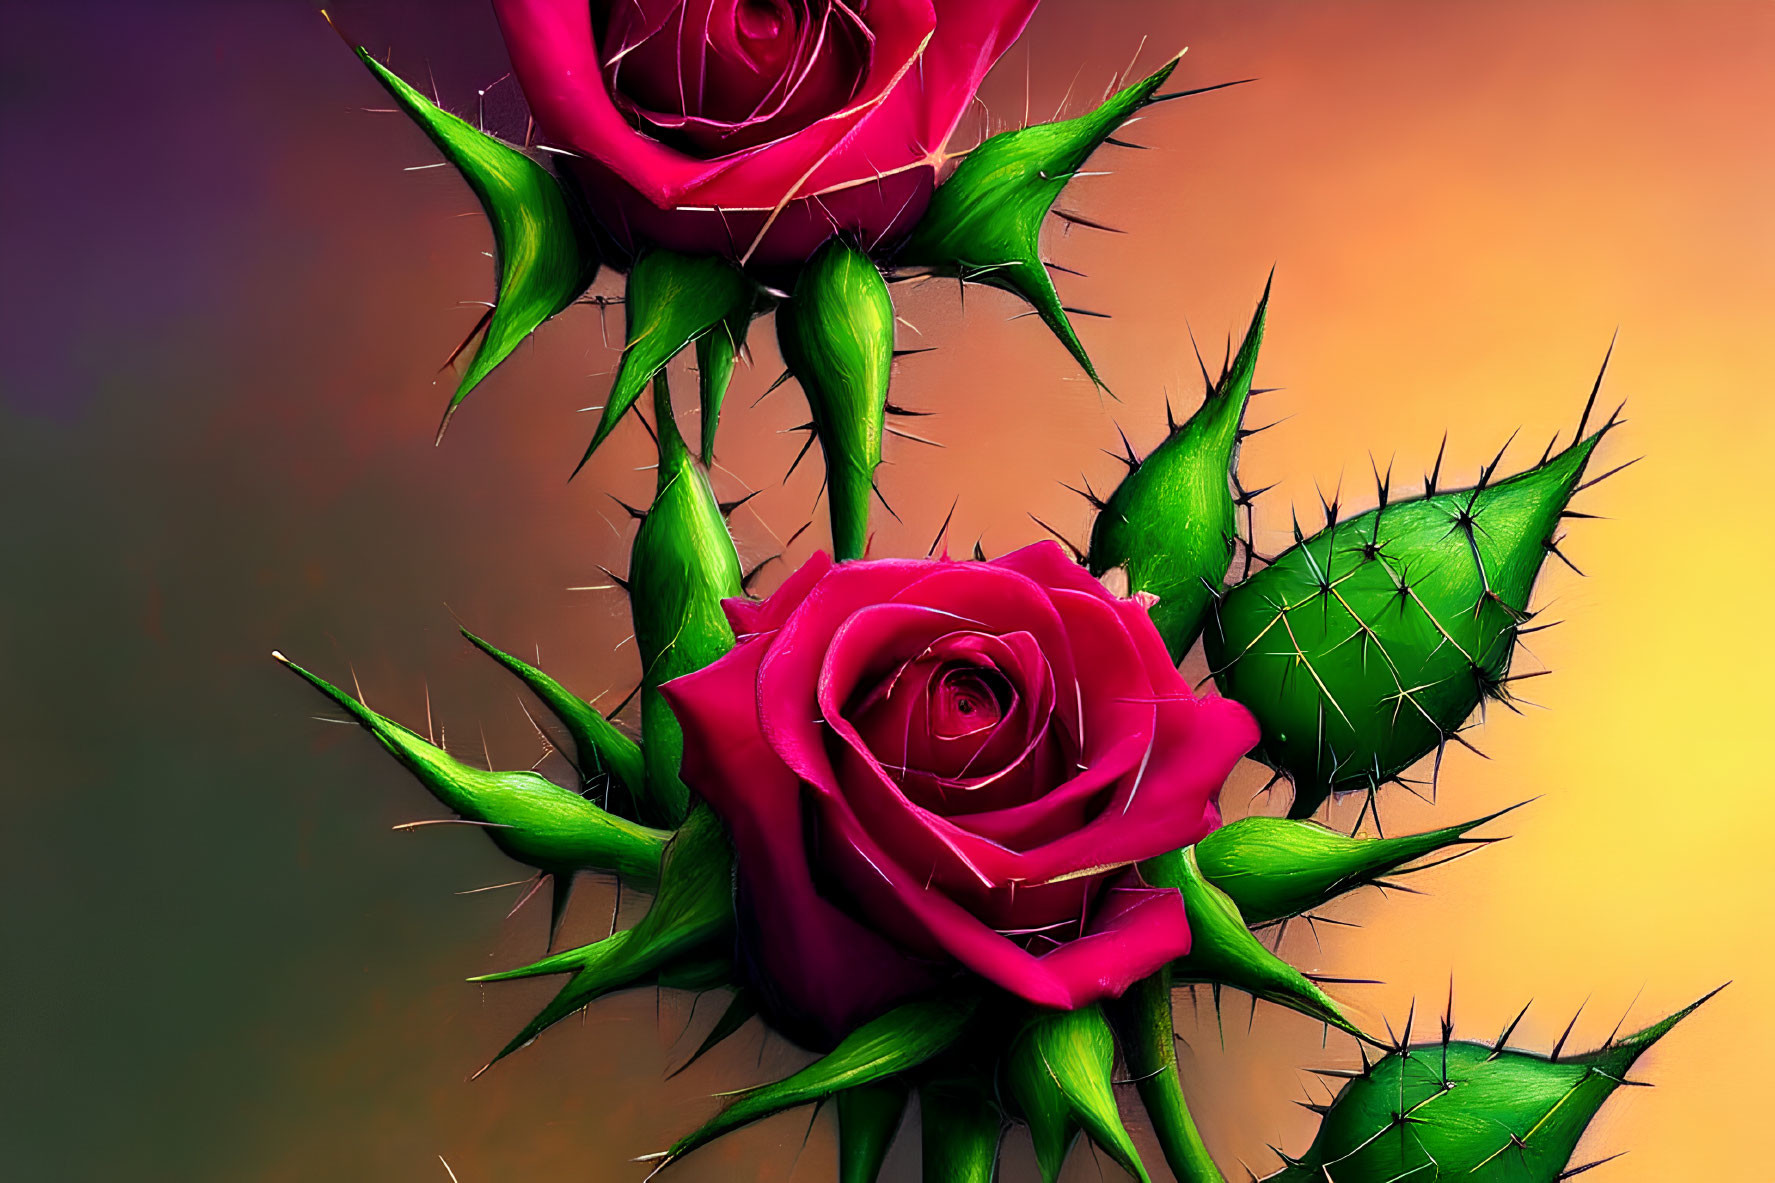 Vibrant pink roses with green thorns on orange and purple background